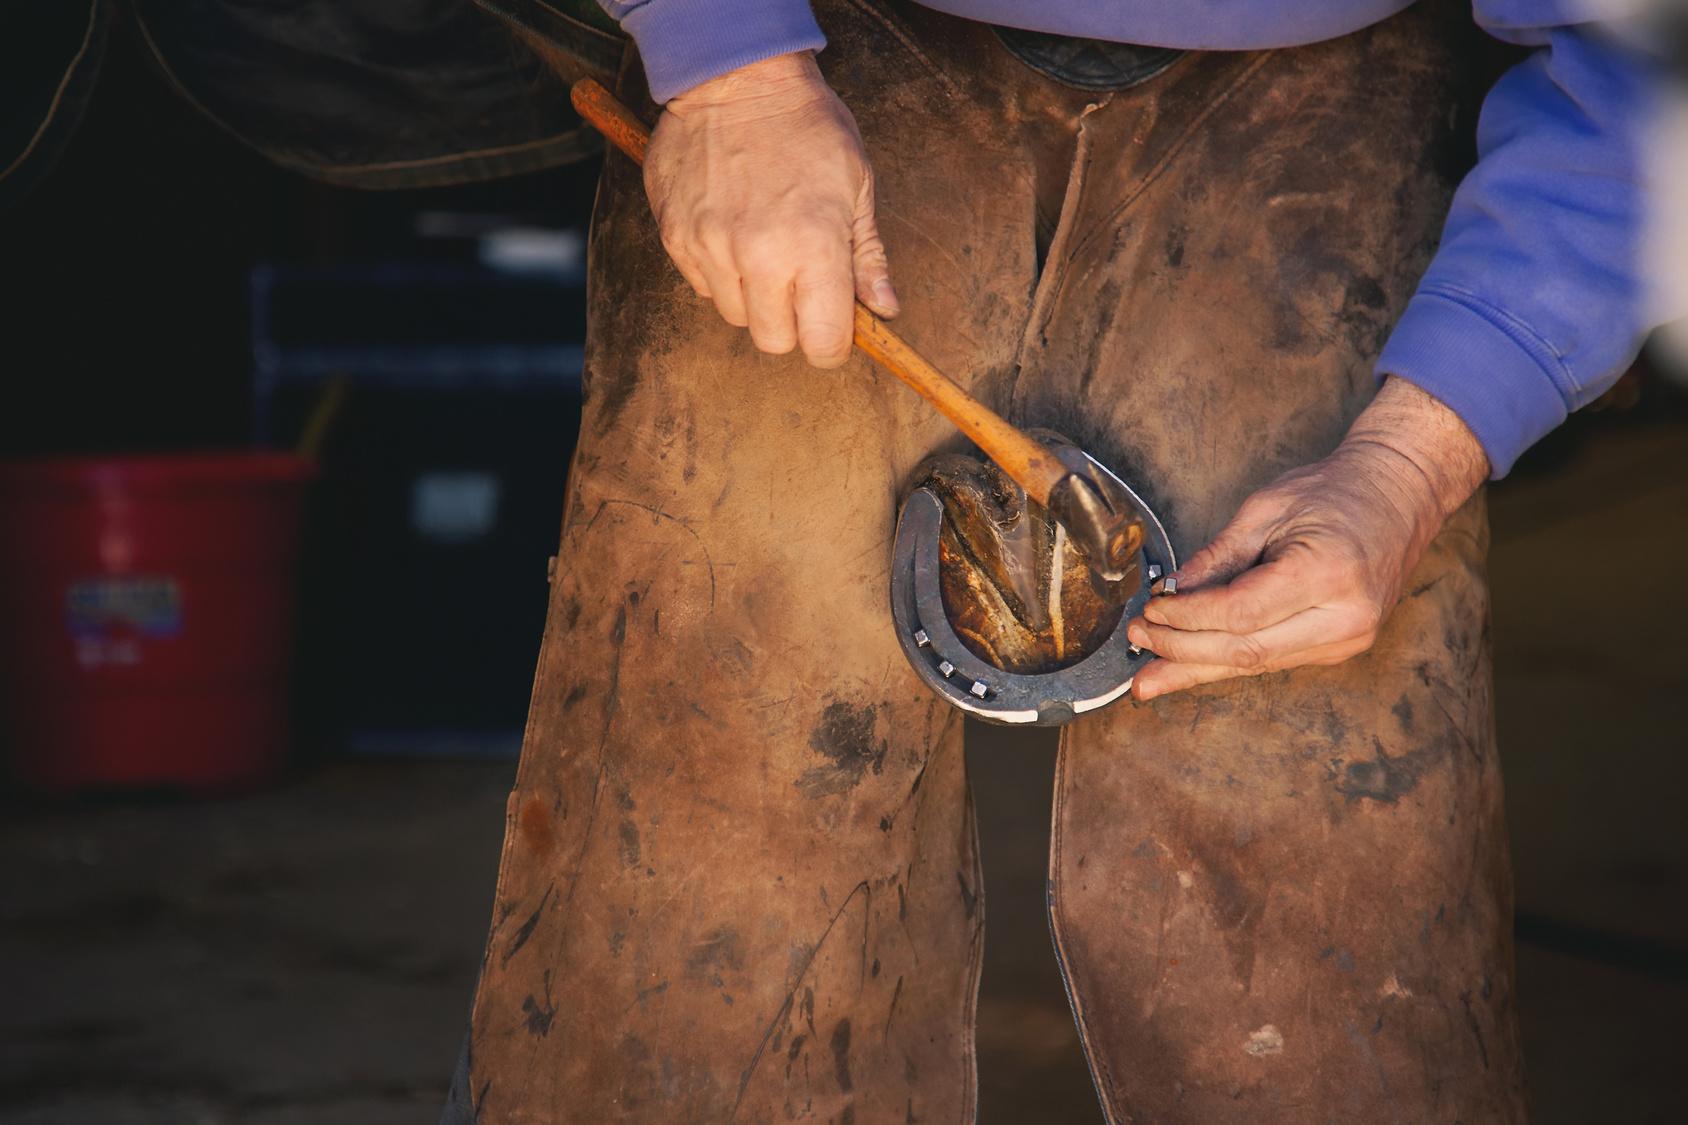 Detail of Farrier working his trade. Horse Hoof held in place while the craftsman positions new Horseshoe.